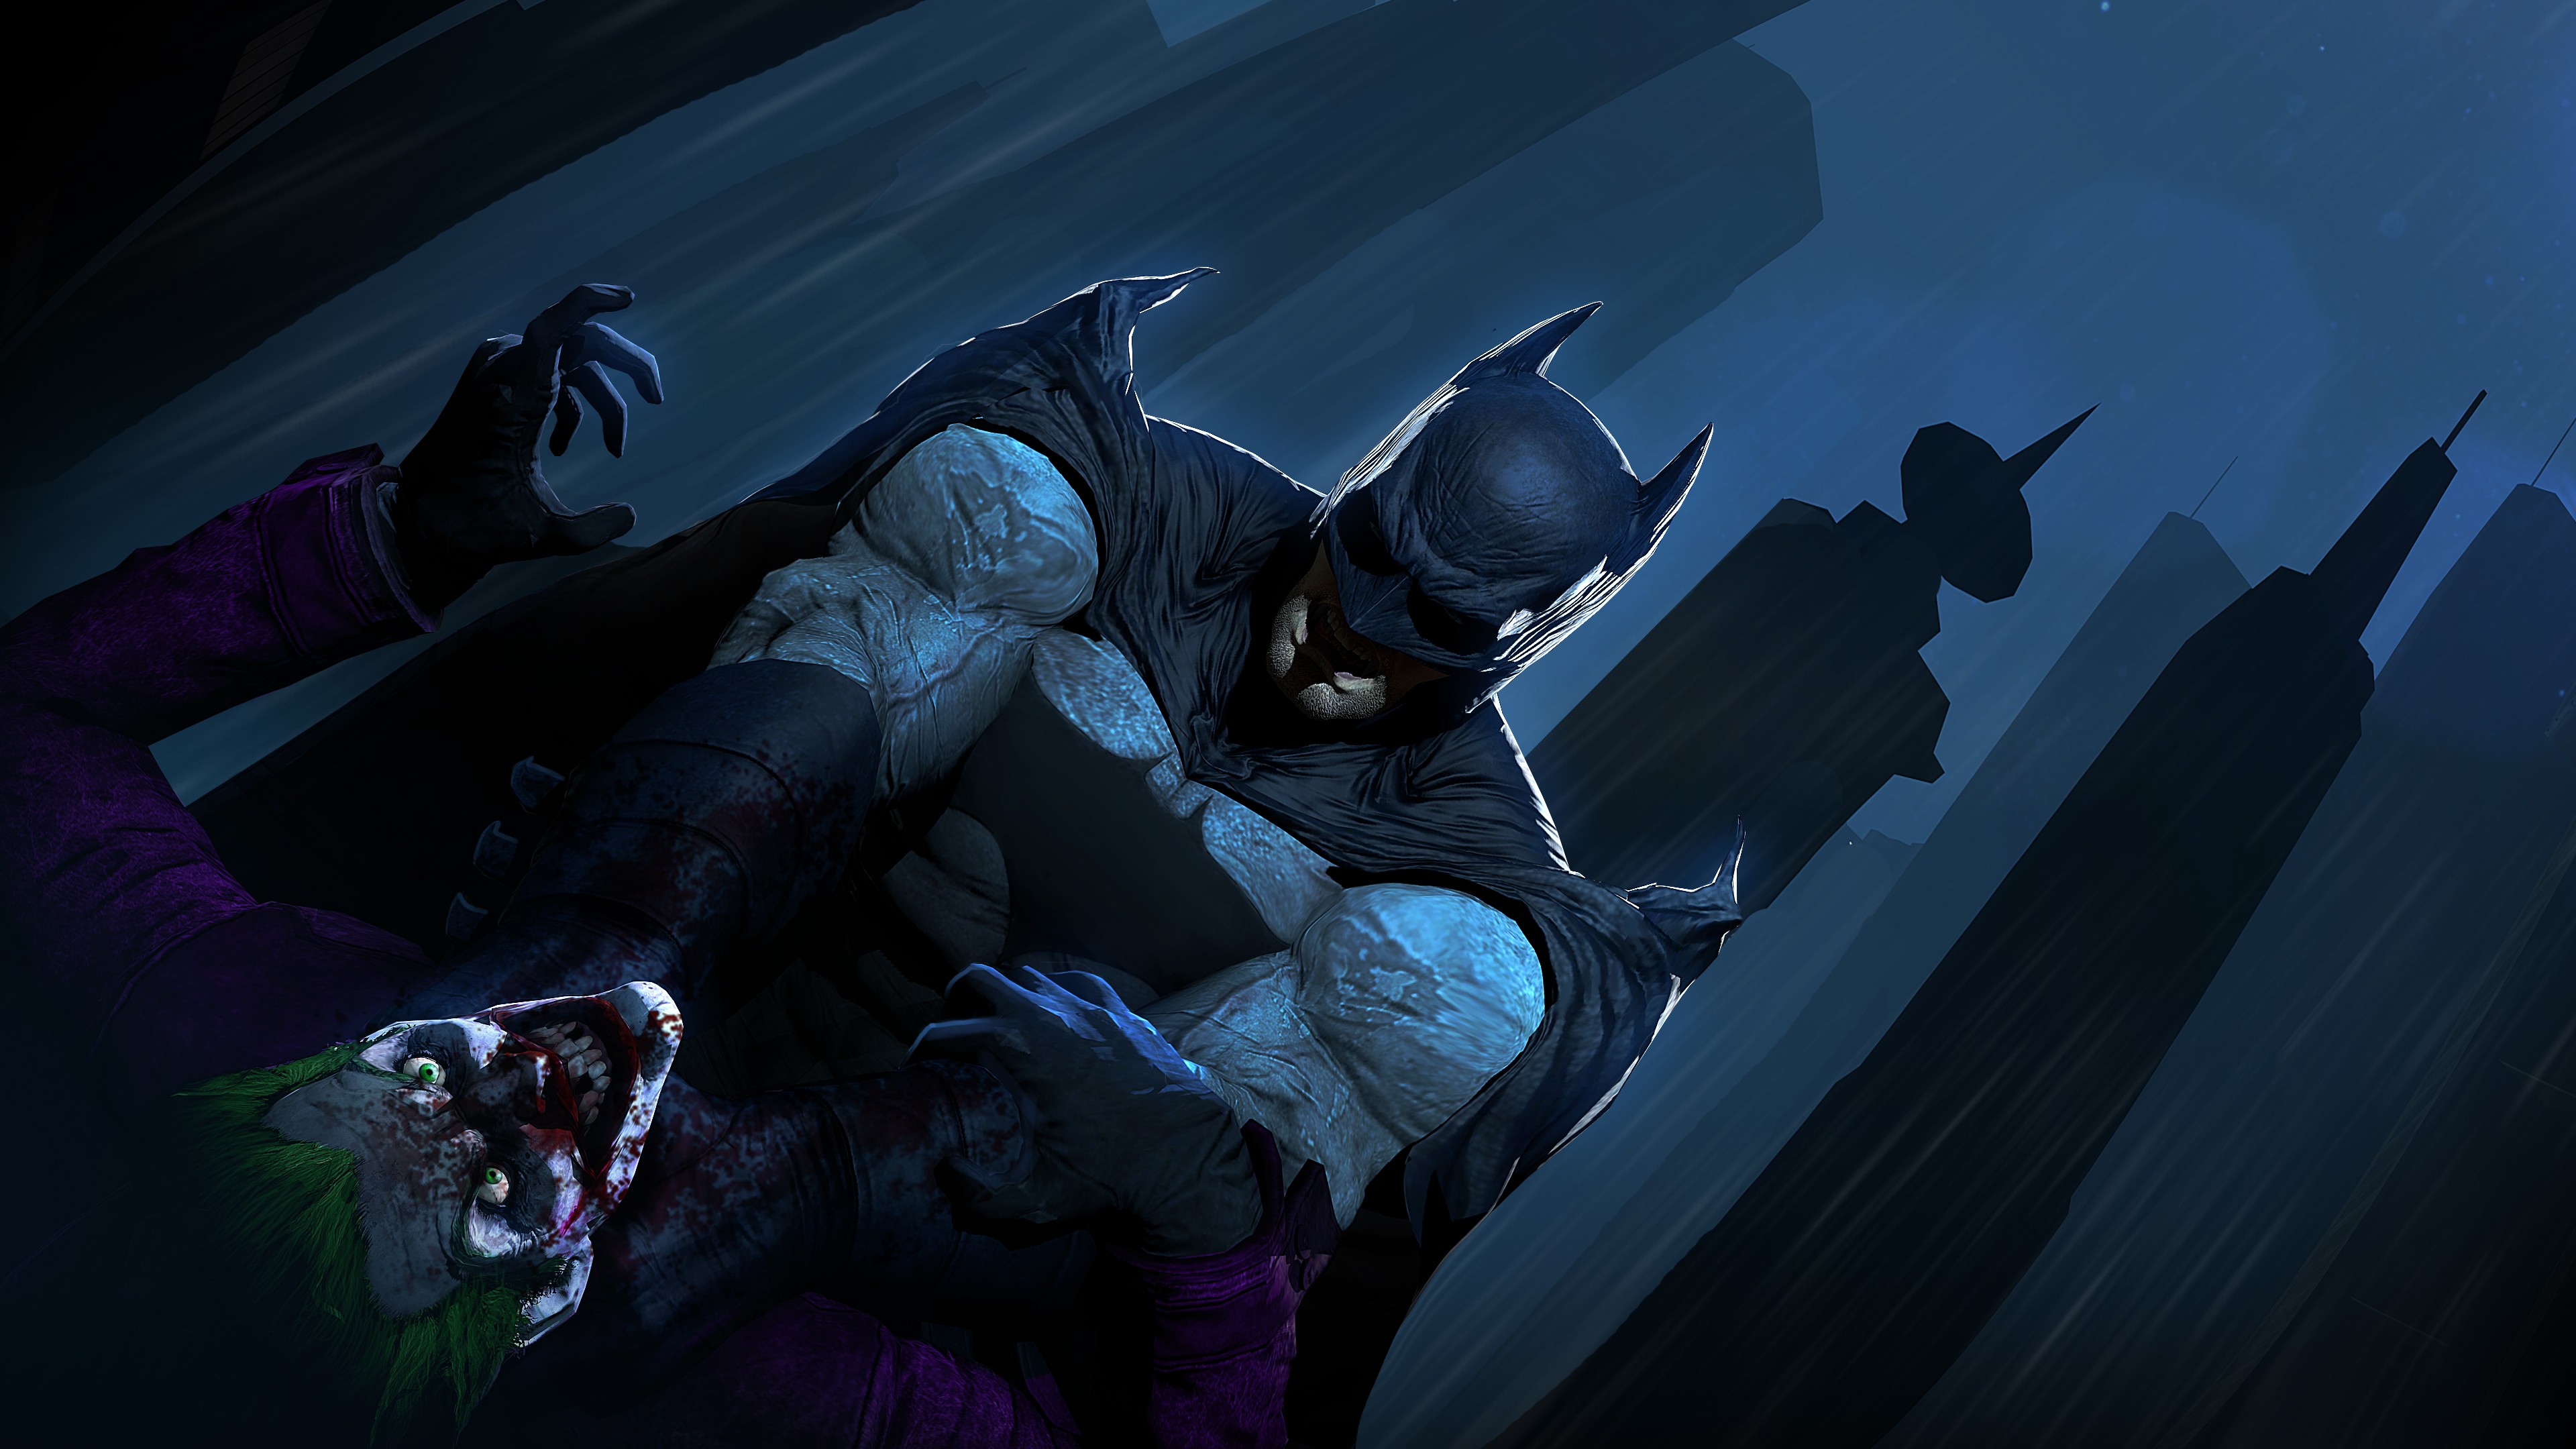 Batman 4K wallpapers for your desktop or mobile screen free and